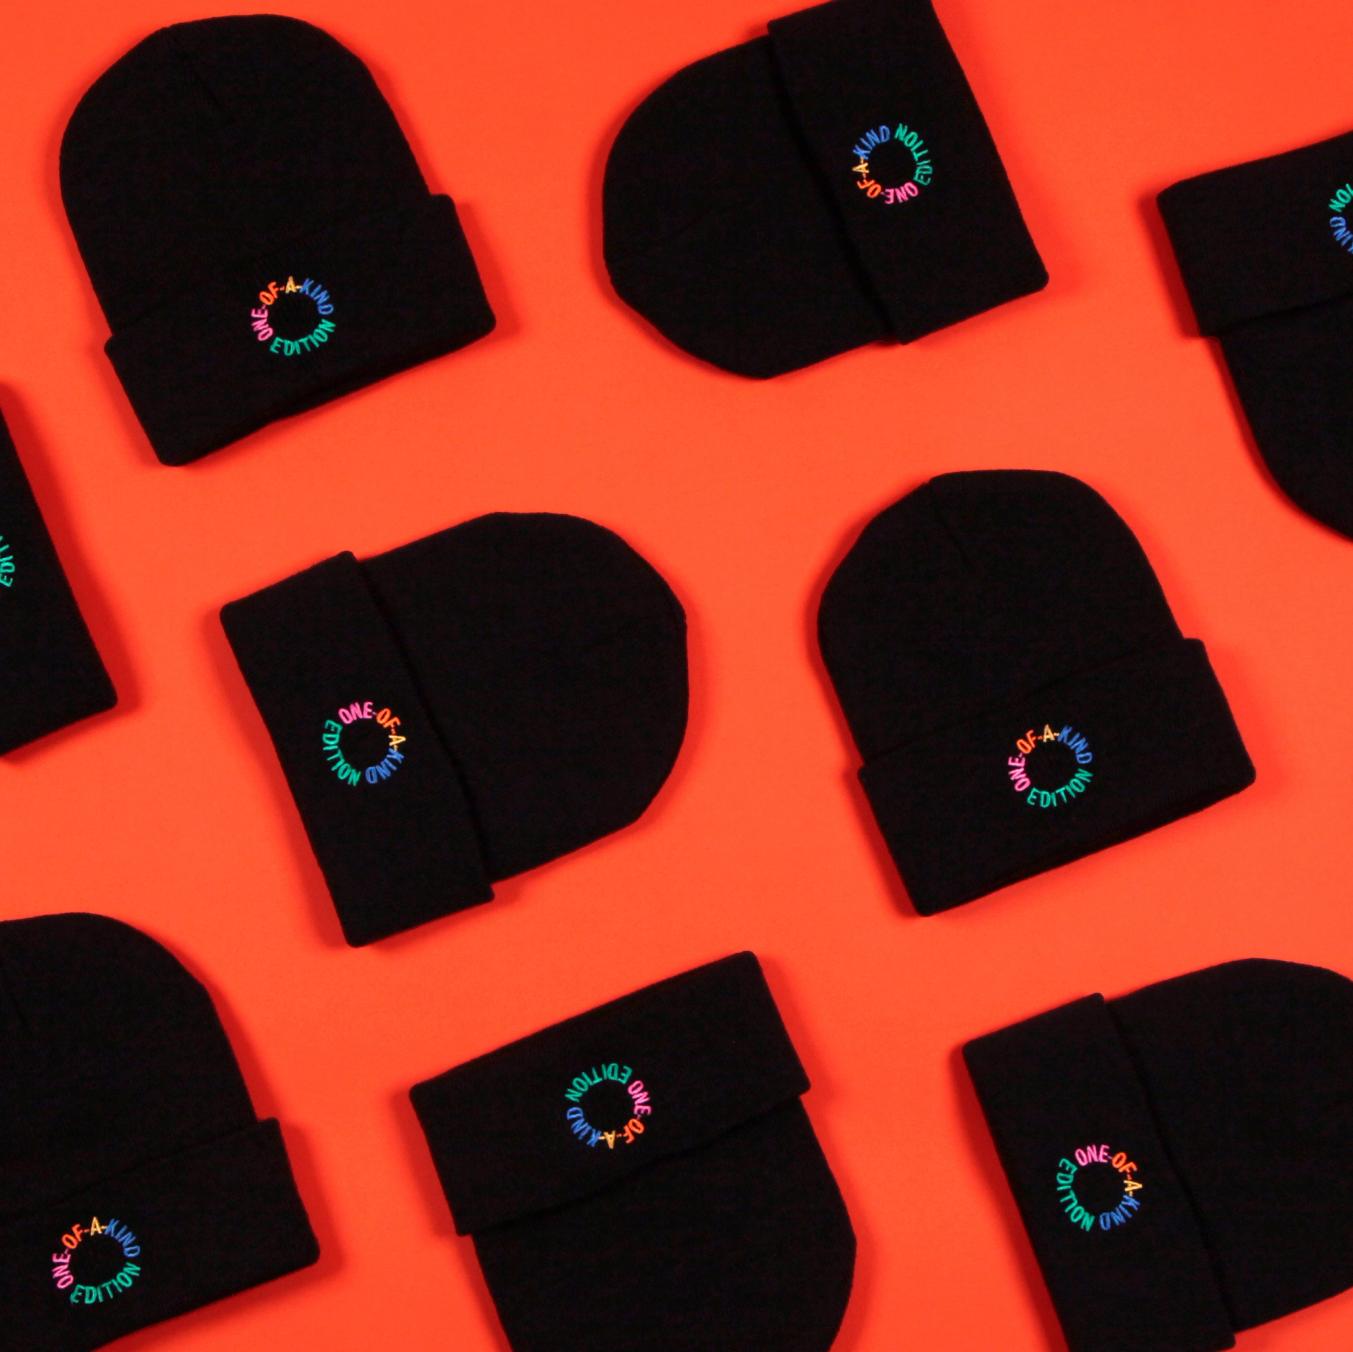 Multiple black beanies are set out in a grid against a tomato red background. Each beanie has a graphic that reads "one-of-a-kind edition" in a circular text layout. Each word is a different color, in pink, orange, yellow, blue, and green.